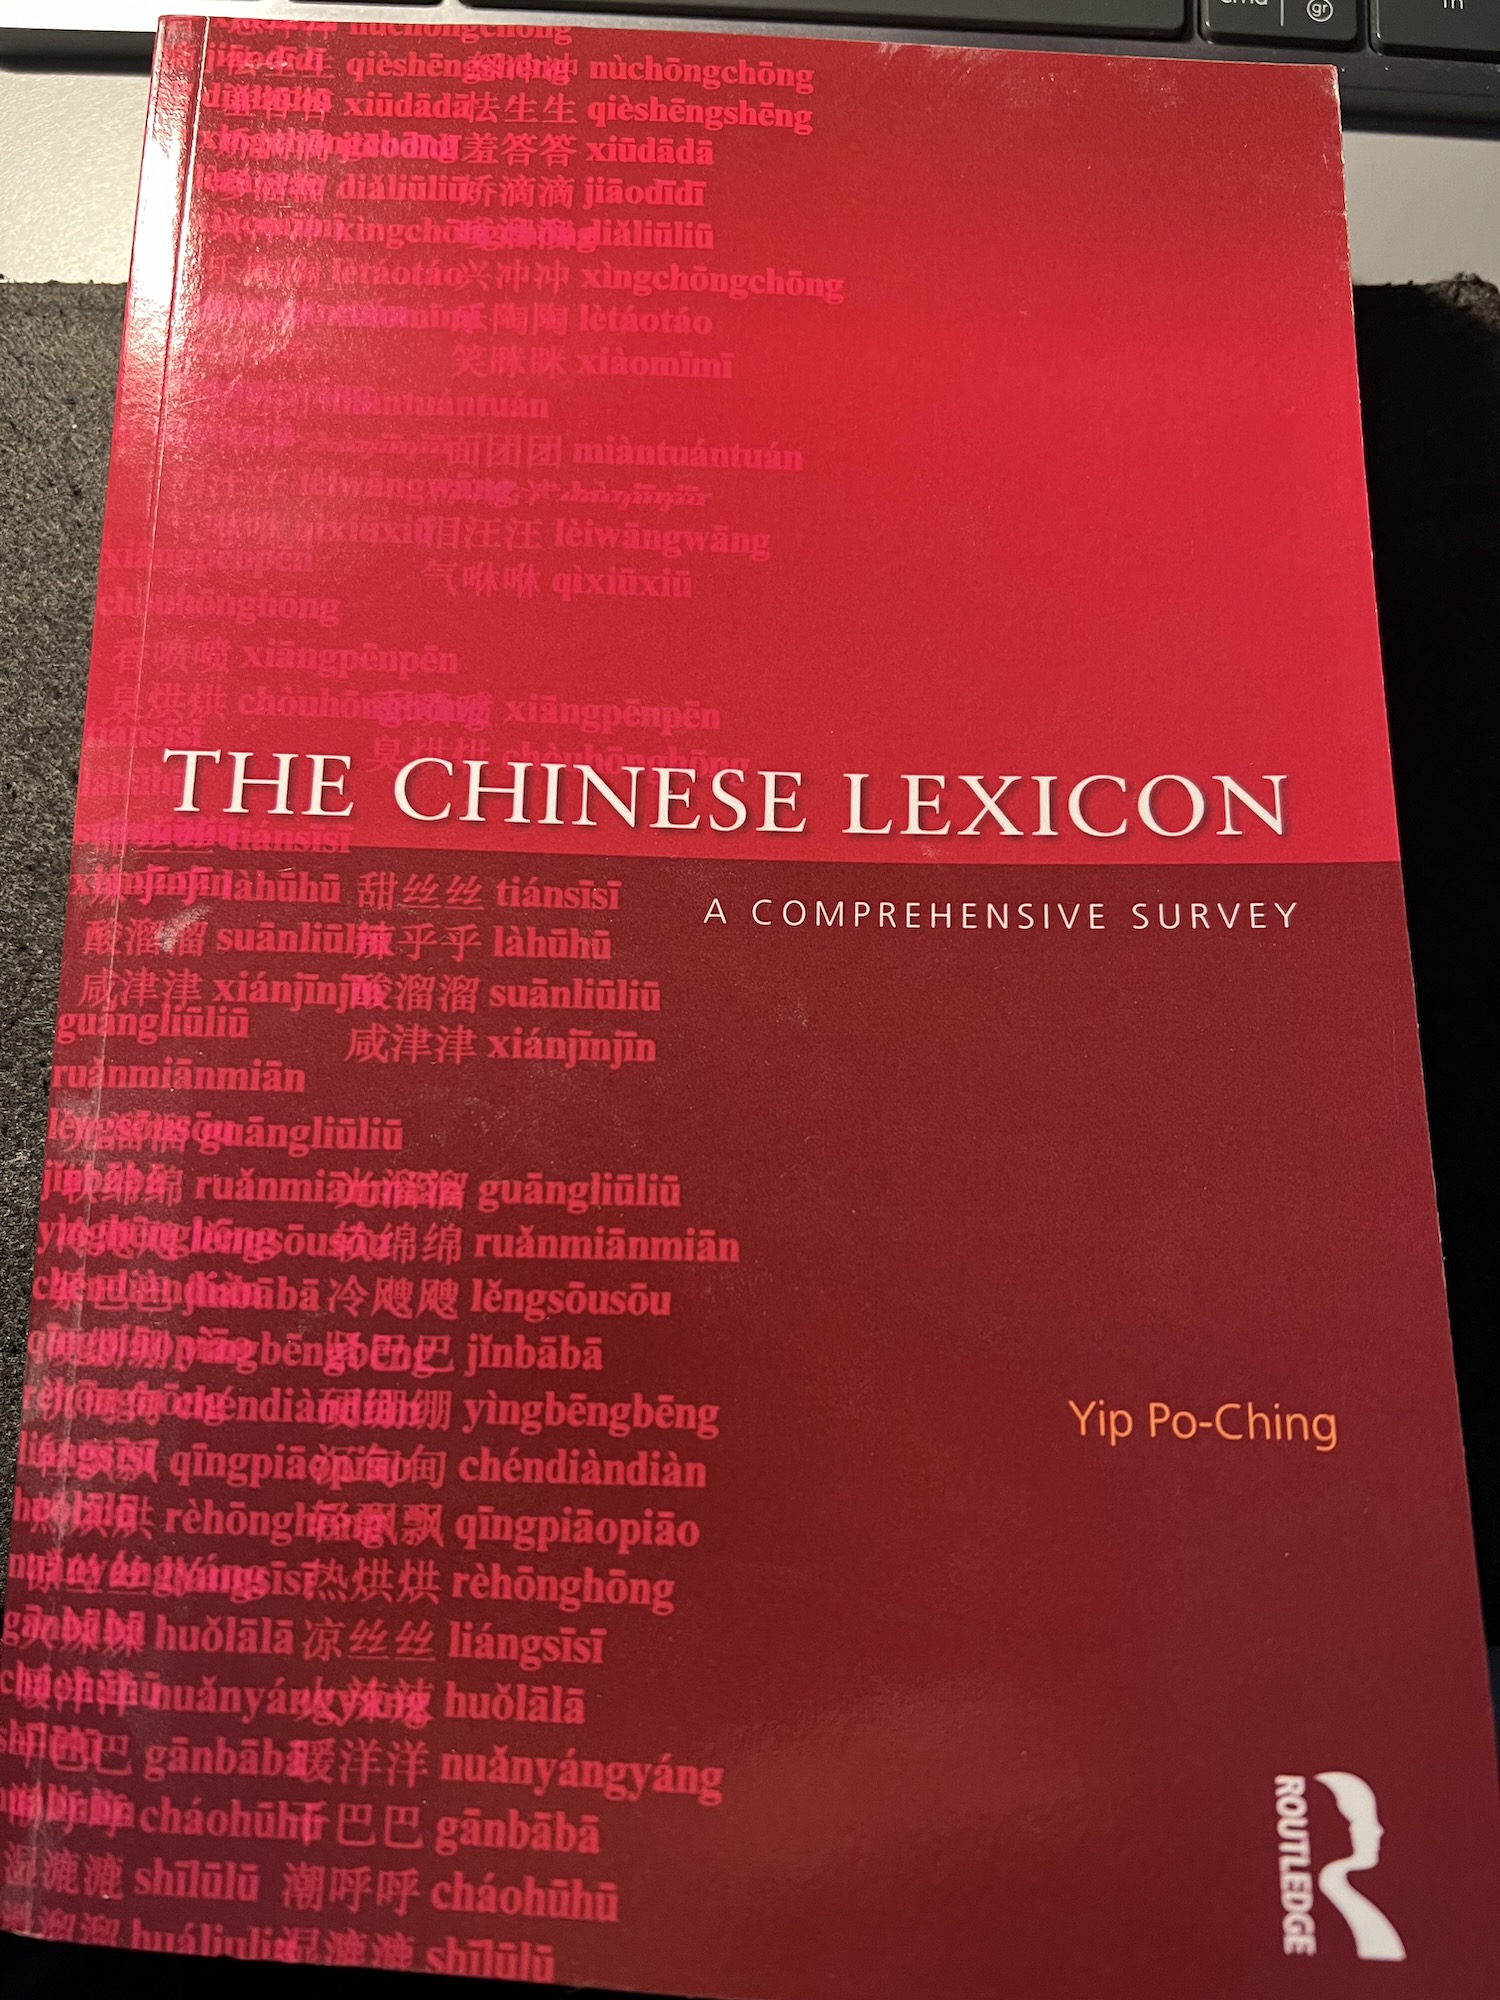 The Chinese Lexicon - Cover.jpeg